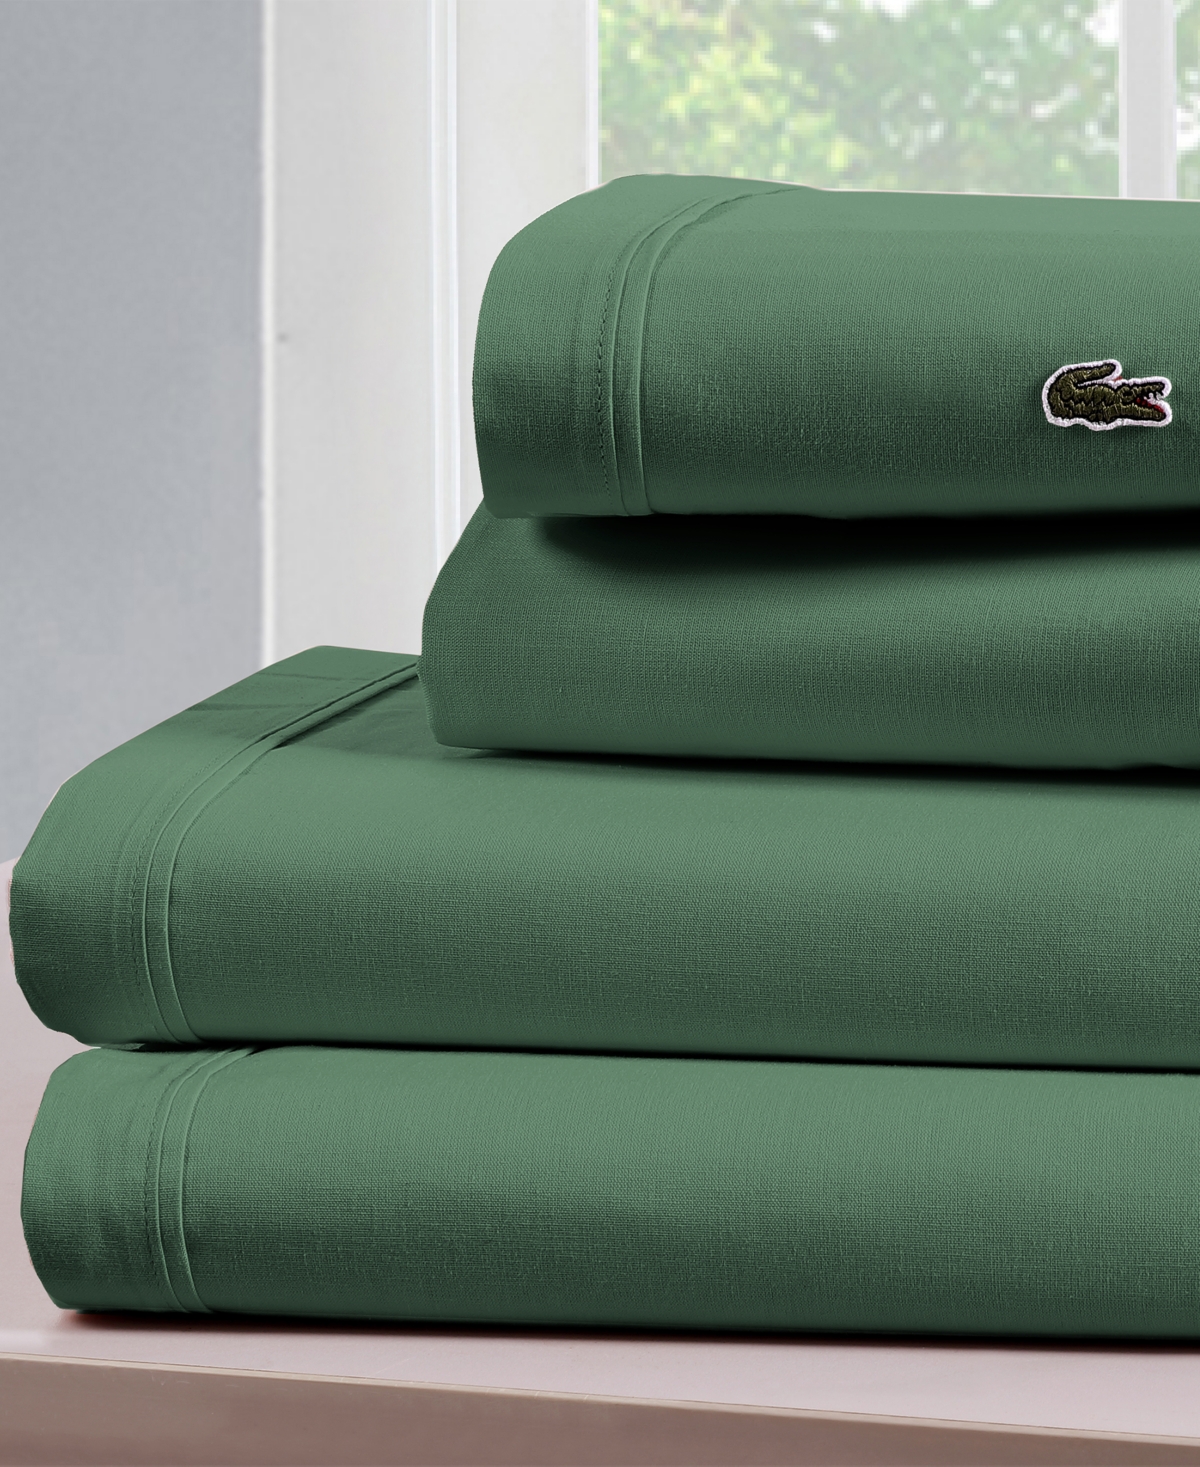 Lacoste Home Solid Cotton Percale Sheet Set, Full In Ivy Green